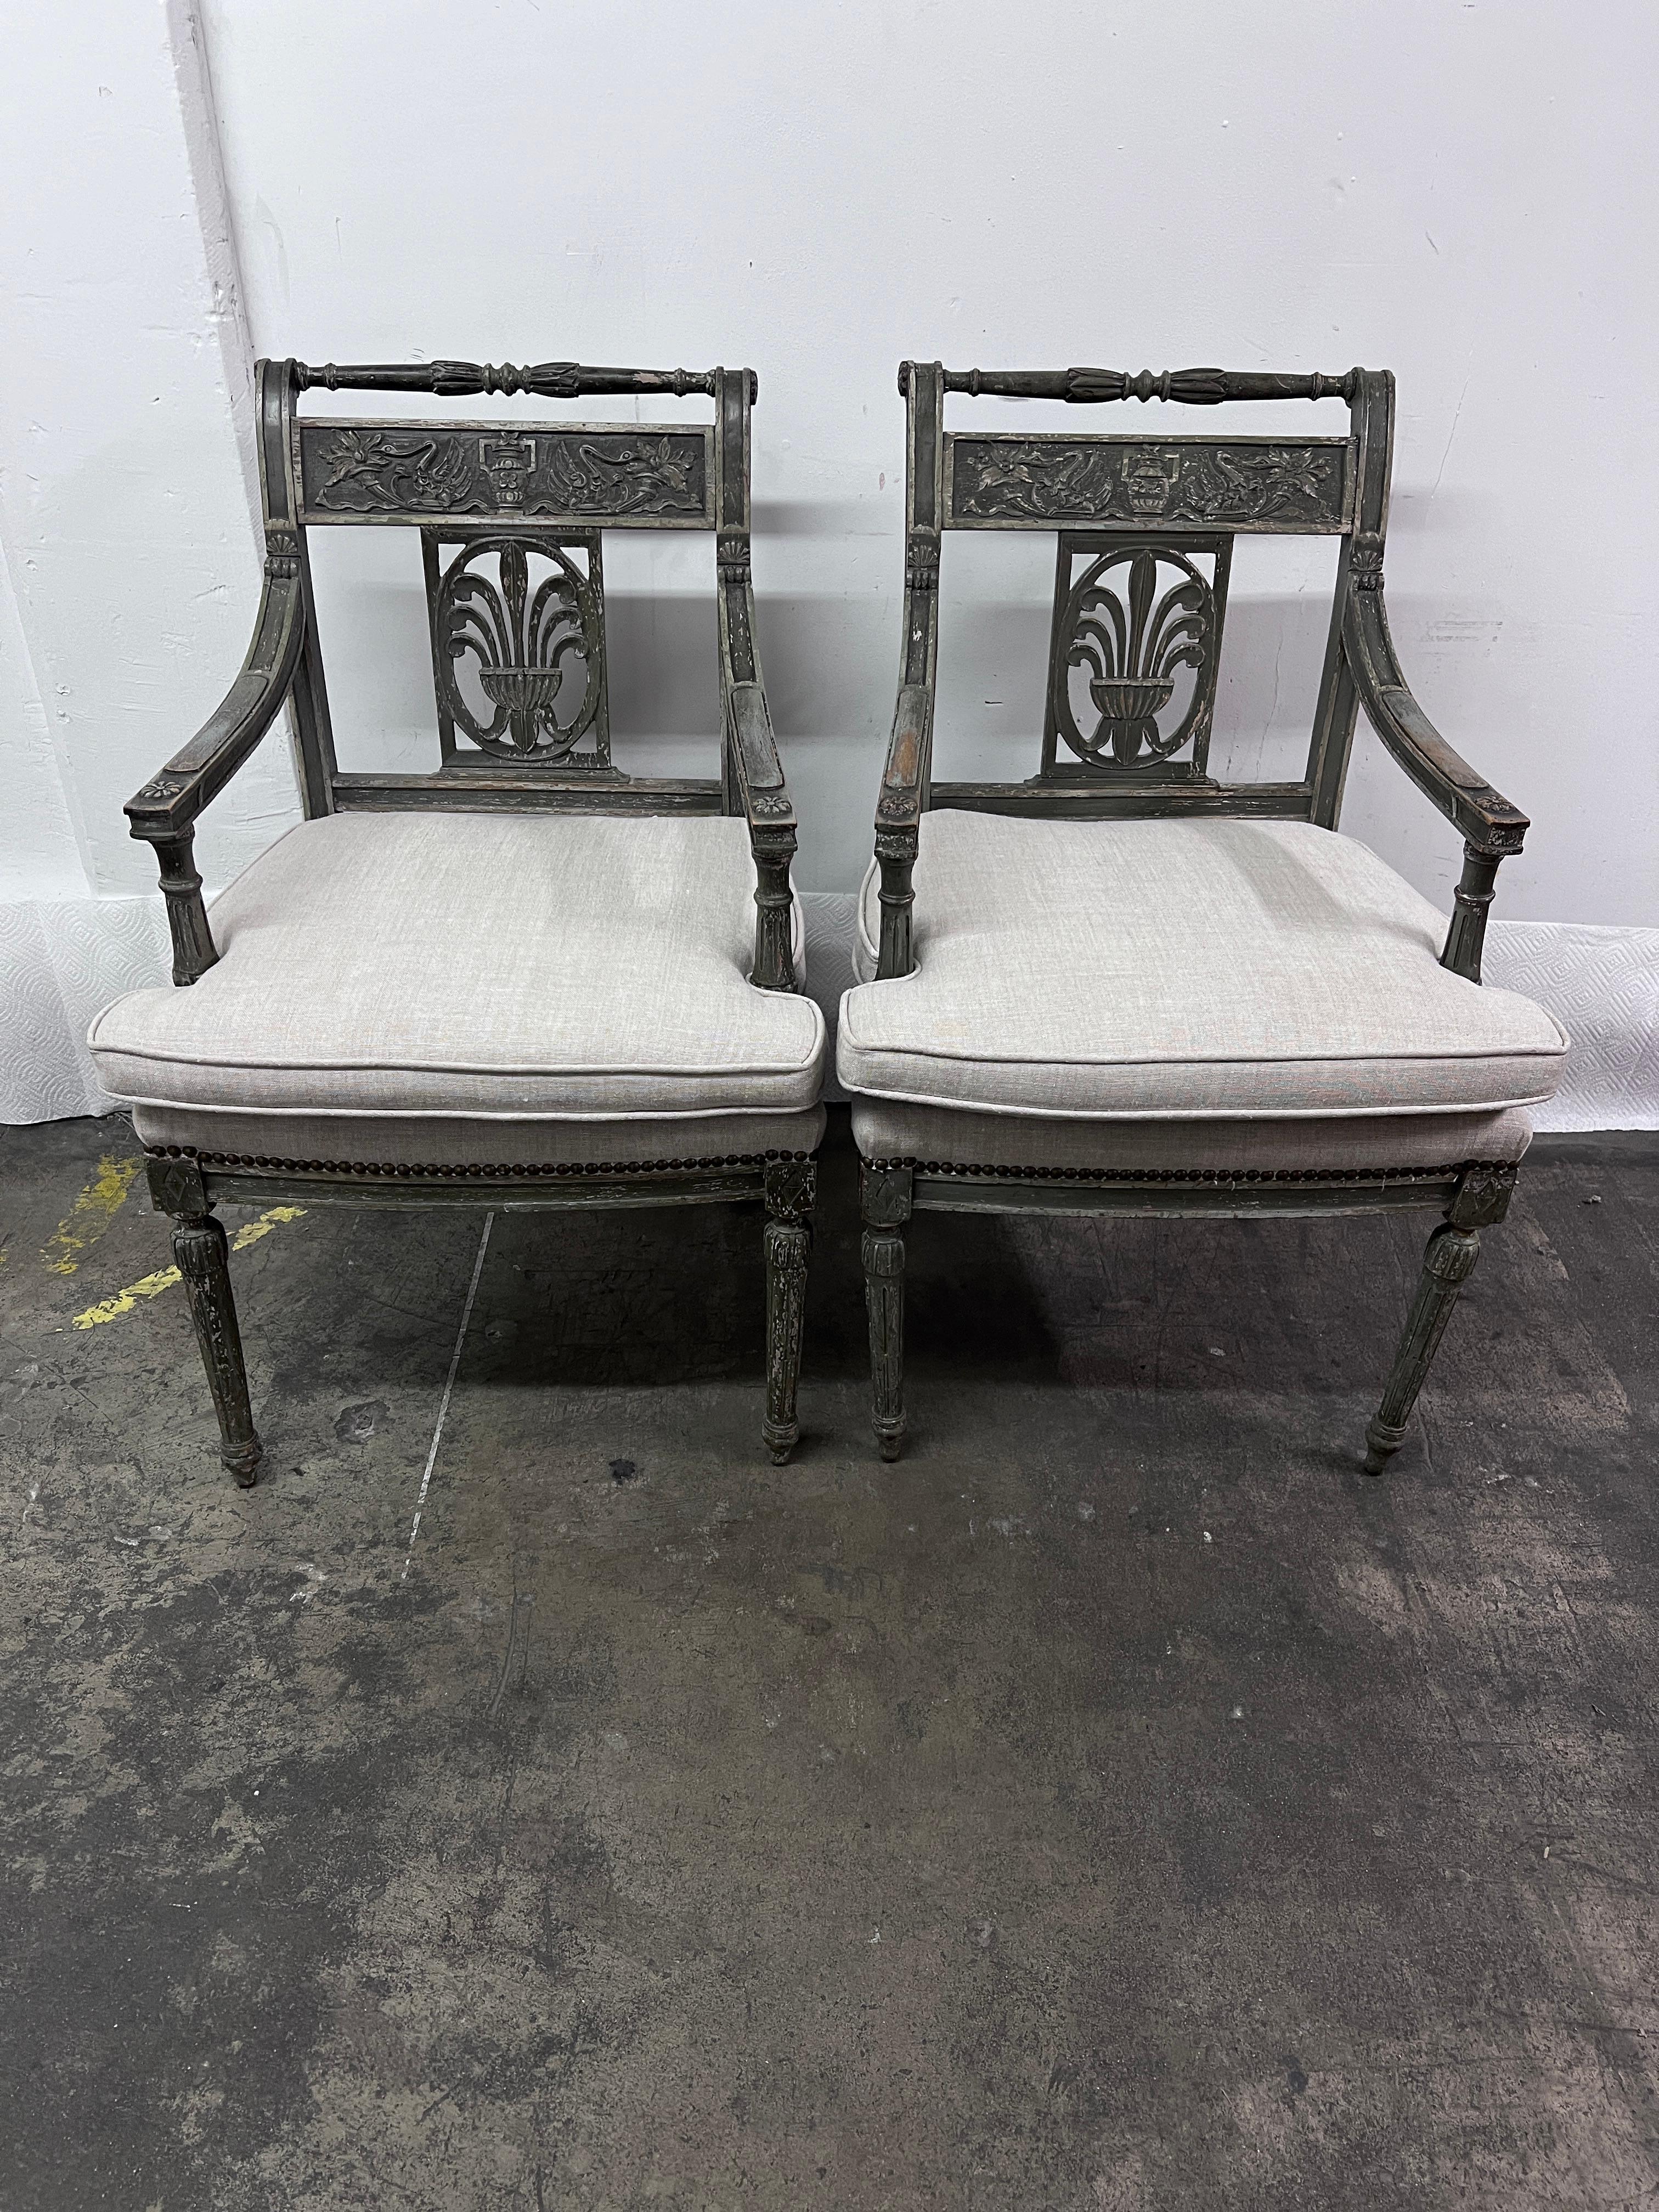 A beautiful pari of Late 18th C., Early 19th C., Swedish Gustavian Chairs.

The Swedish Grey patination is perfection and the attention to detail, carving and design represent the era and classic design.  Upholstered in a fine linen - all in very